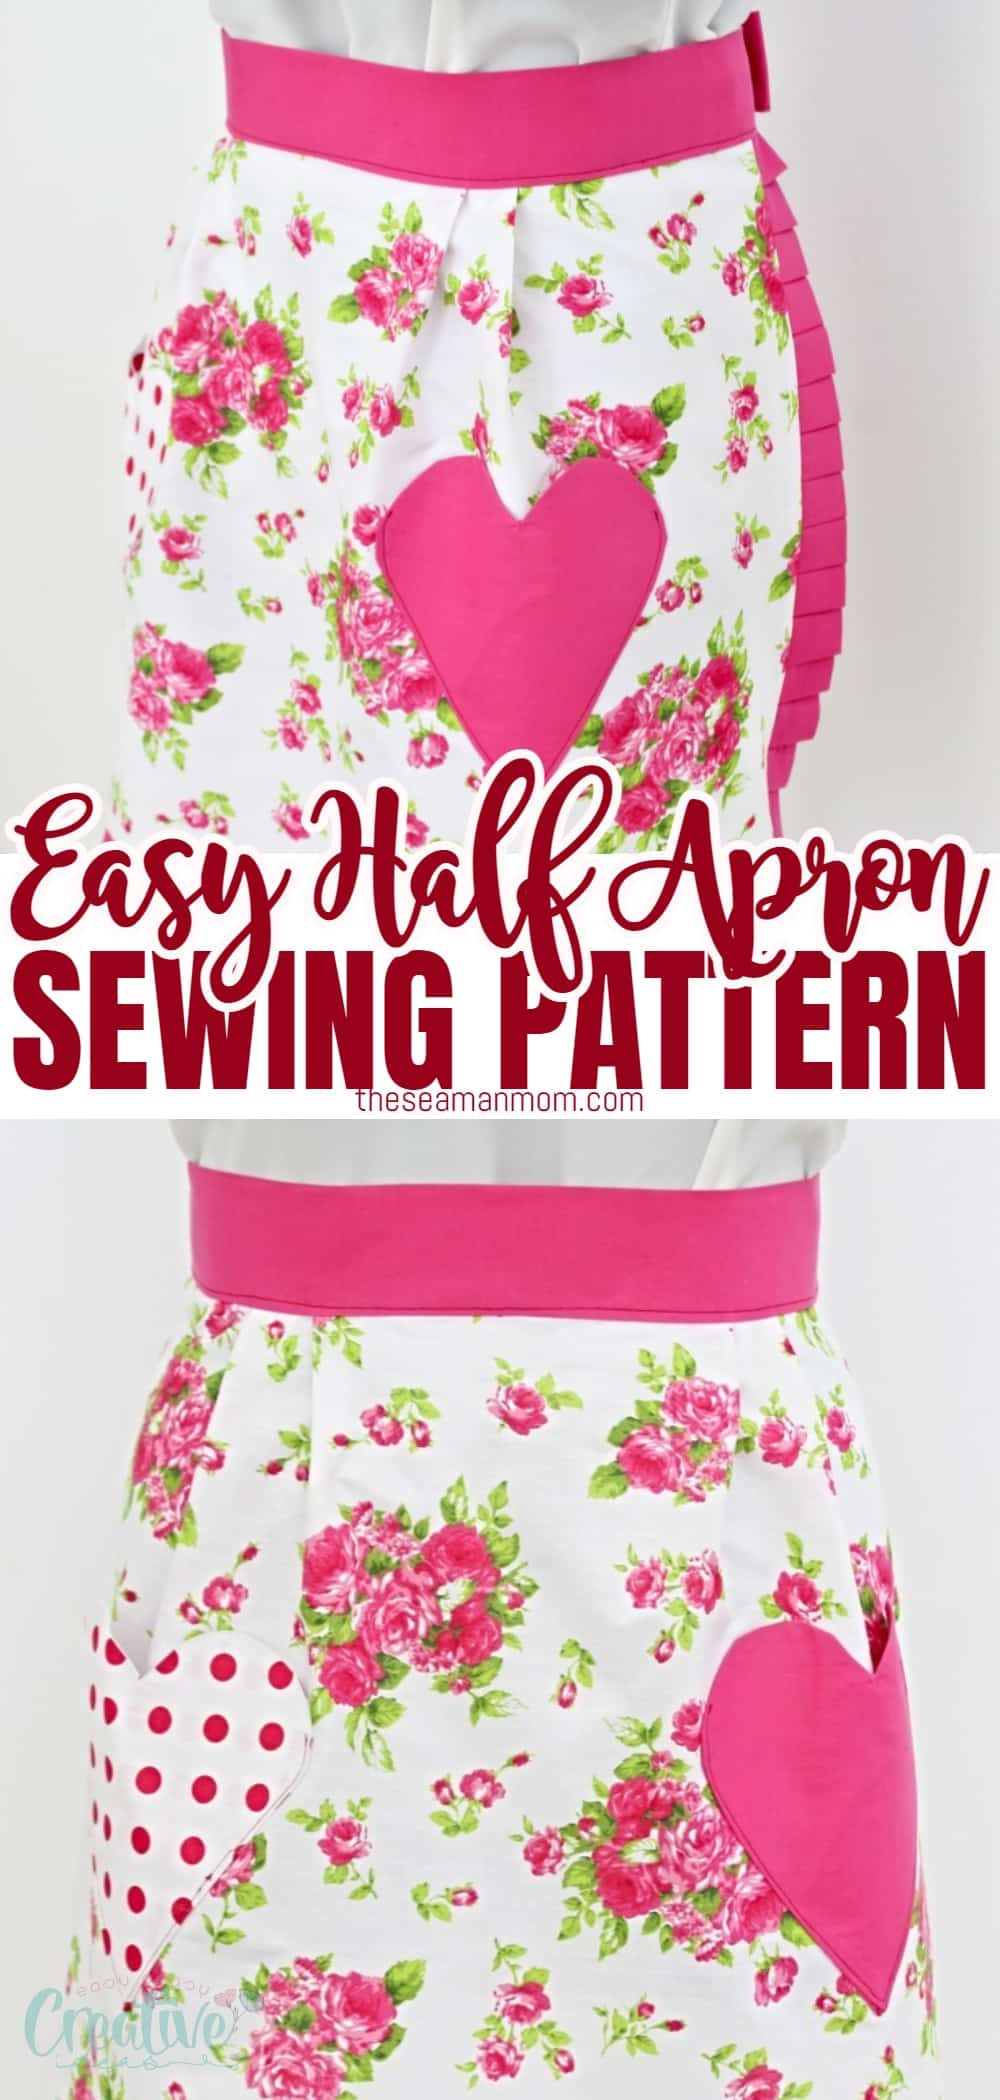 Are you looking for a special way to stitch up beautiful aprons? My half apron pattern makes the perfect Valentine's Day present or personal DIY project! With heart pockets and an adorable design, this lovely creation is sure to spruce up any kitchen in no time. via @petroneagu